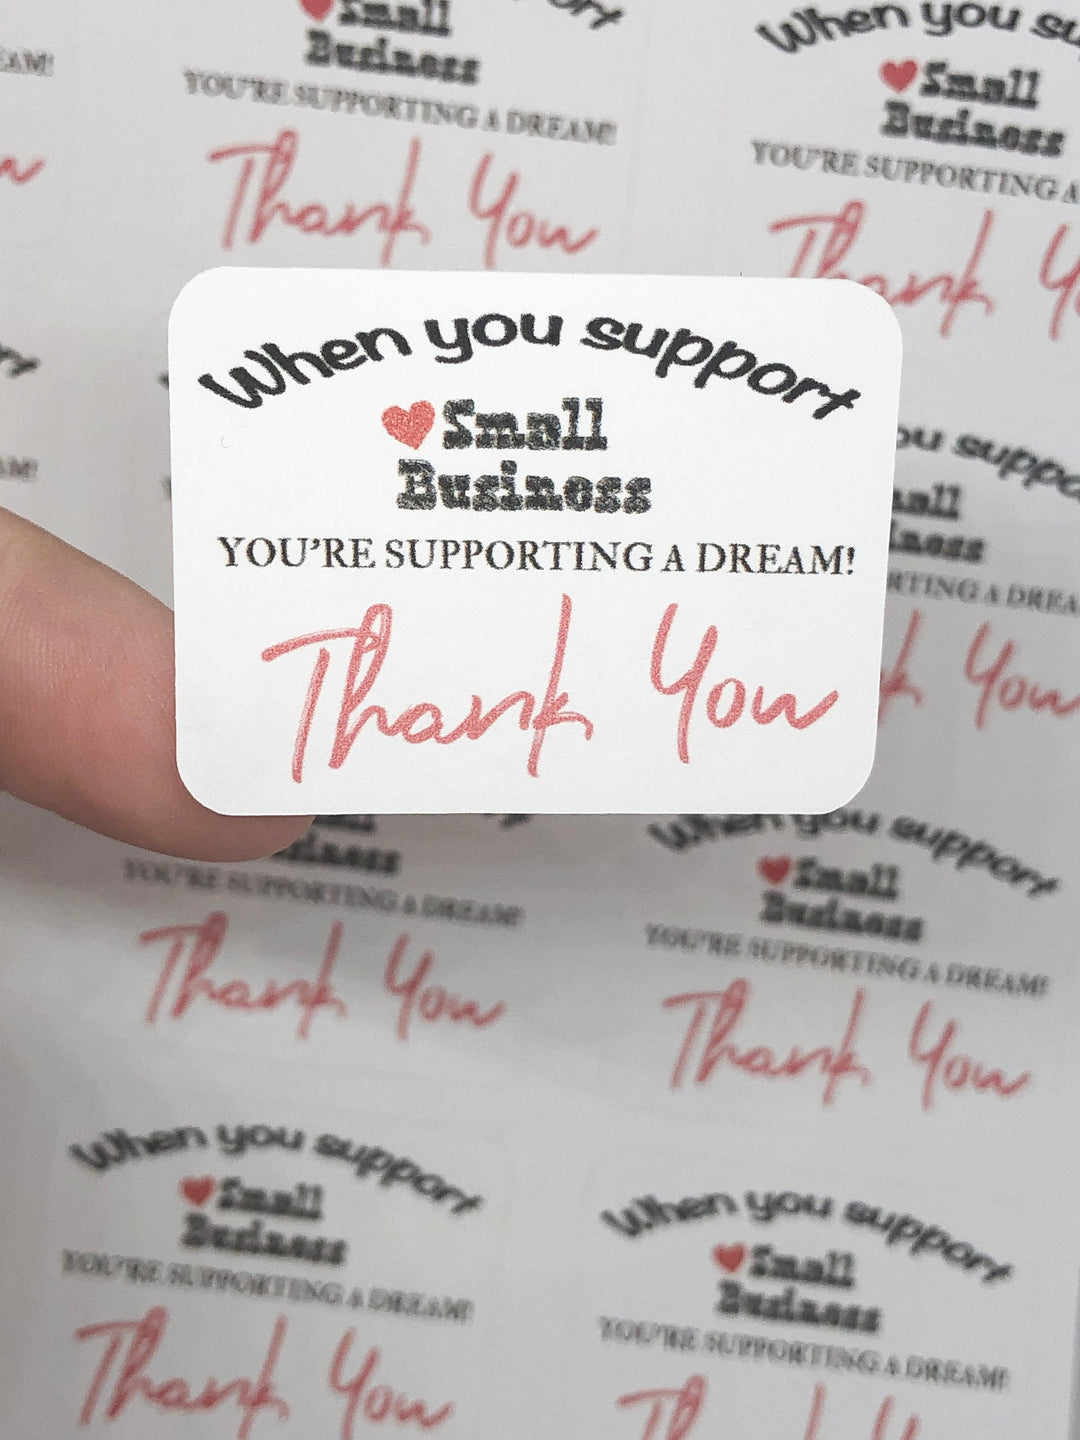 When You Support A Small Business You're Supporting A Dream  |  Packaging Stickers | Business Branding | Small Shop Stickers | Sticker #: S0066 | Ready To Ship